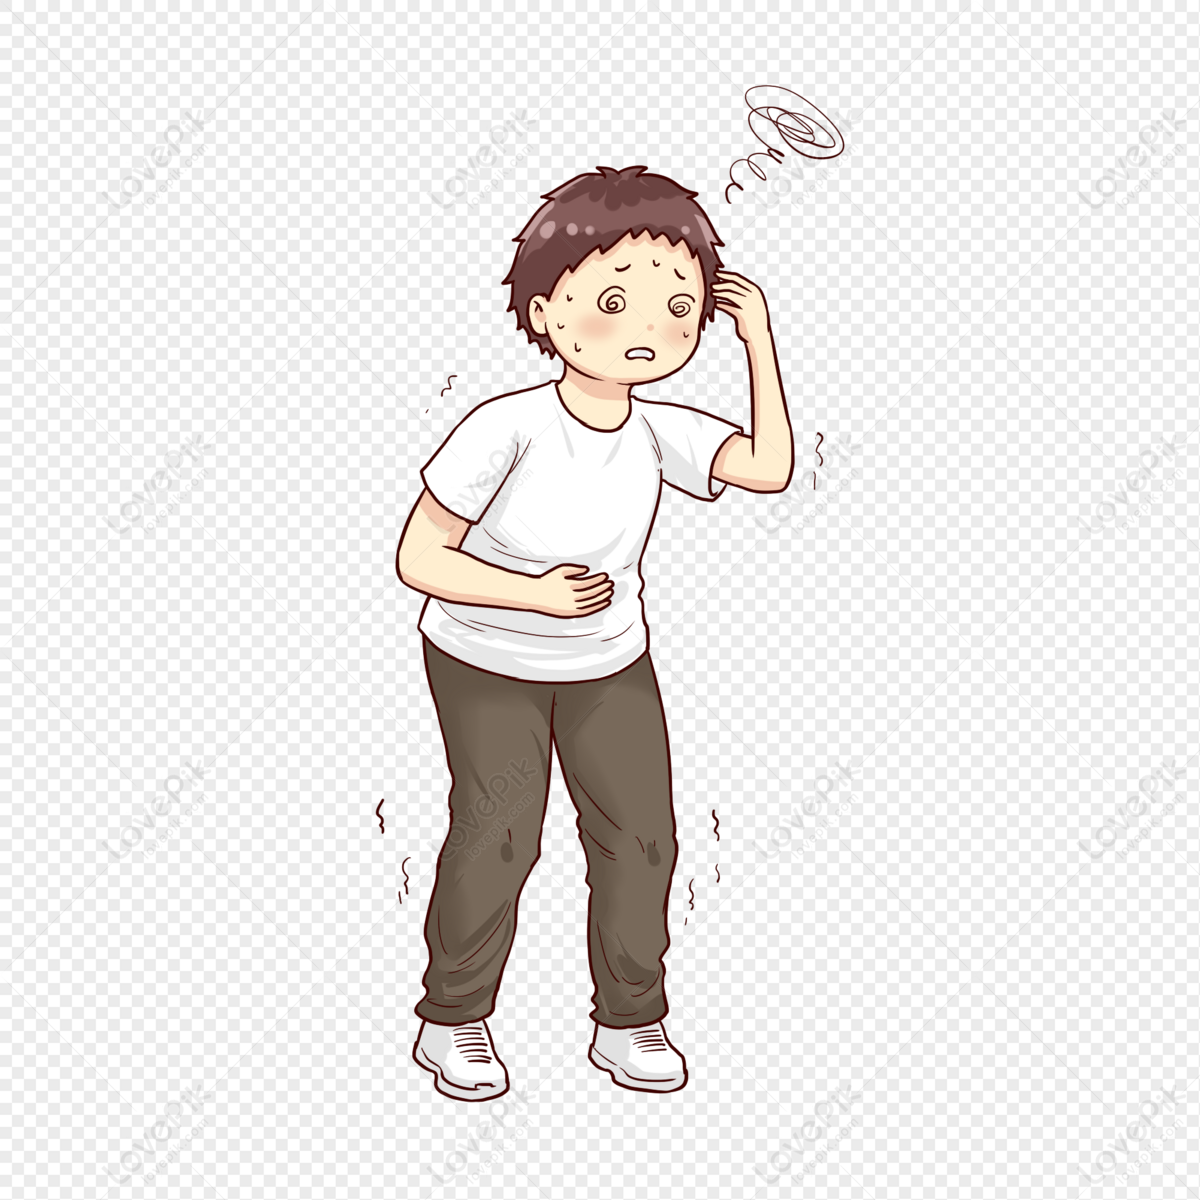 Sick Person Free PNG And Clipart Image For Free Download - Lovepik |  401301049